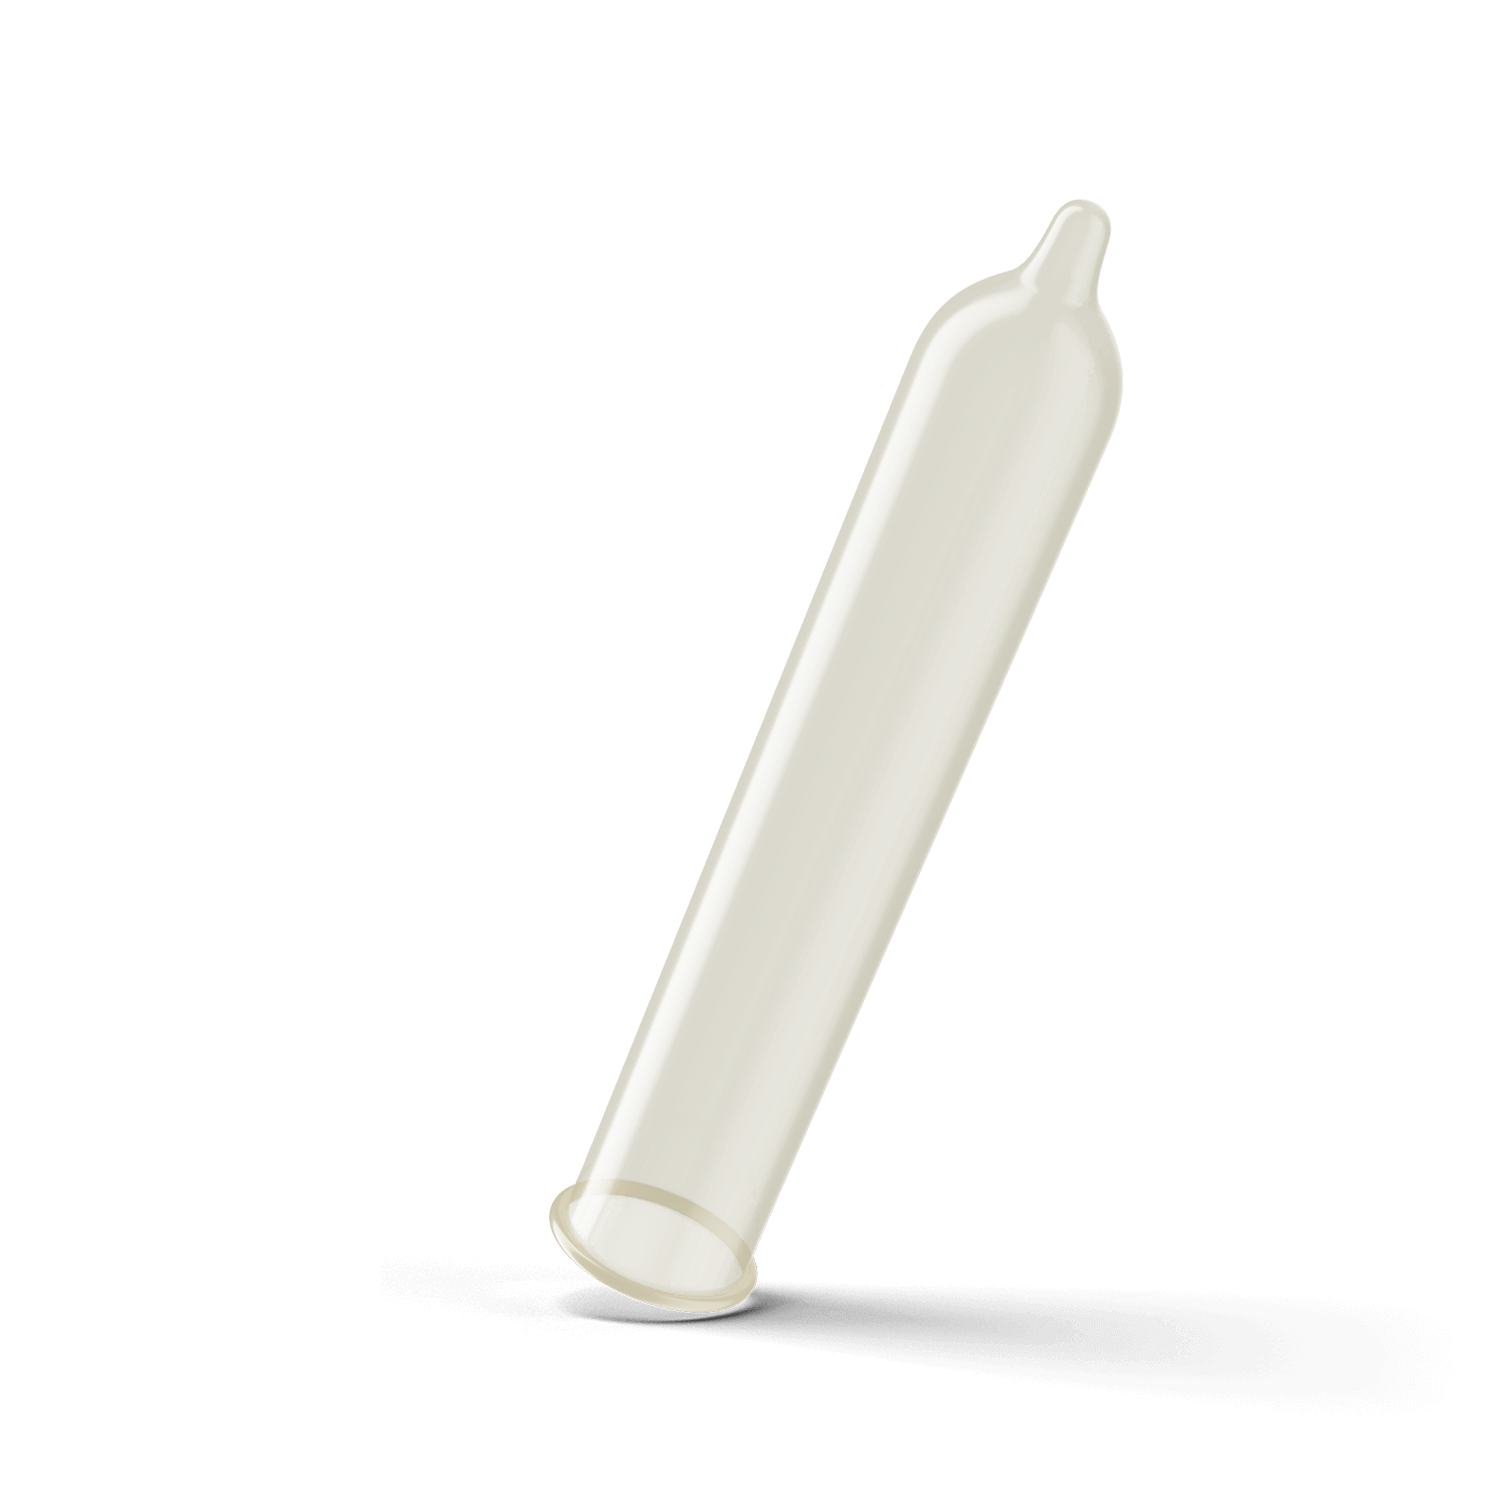 One of the Trojan Ultra Thin Condoms entirely unrolled. This showcases the straight design of the condom alongside the resevoir tip at the tip of it. | Kinkly Shop